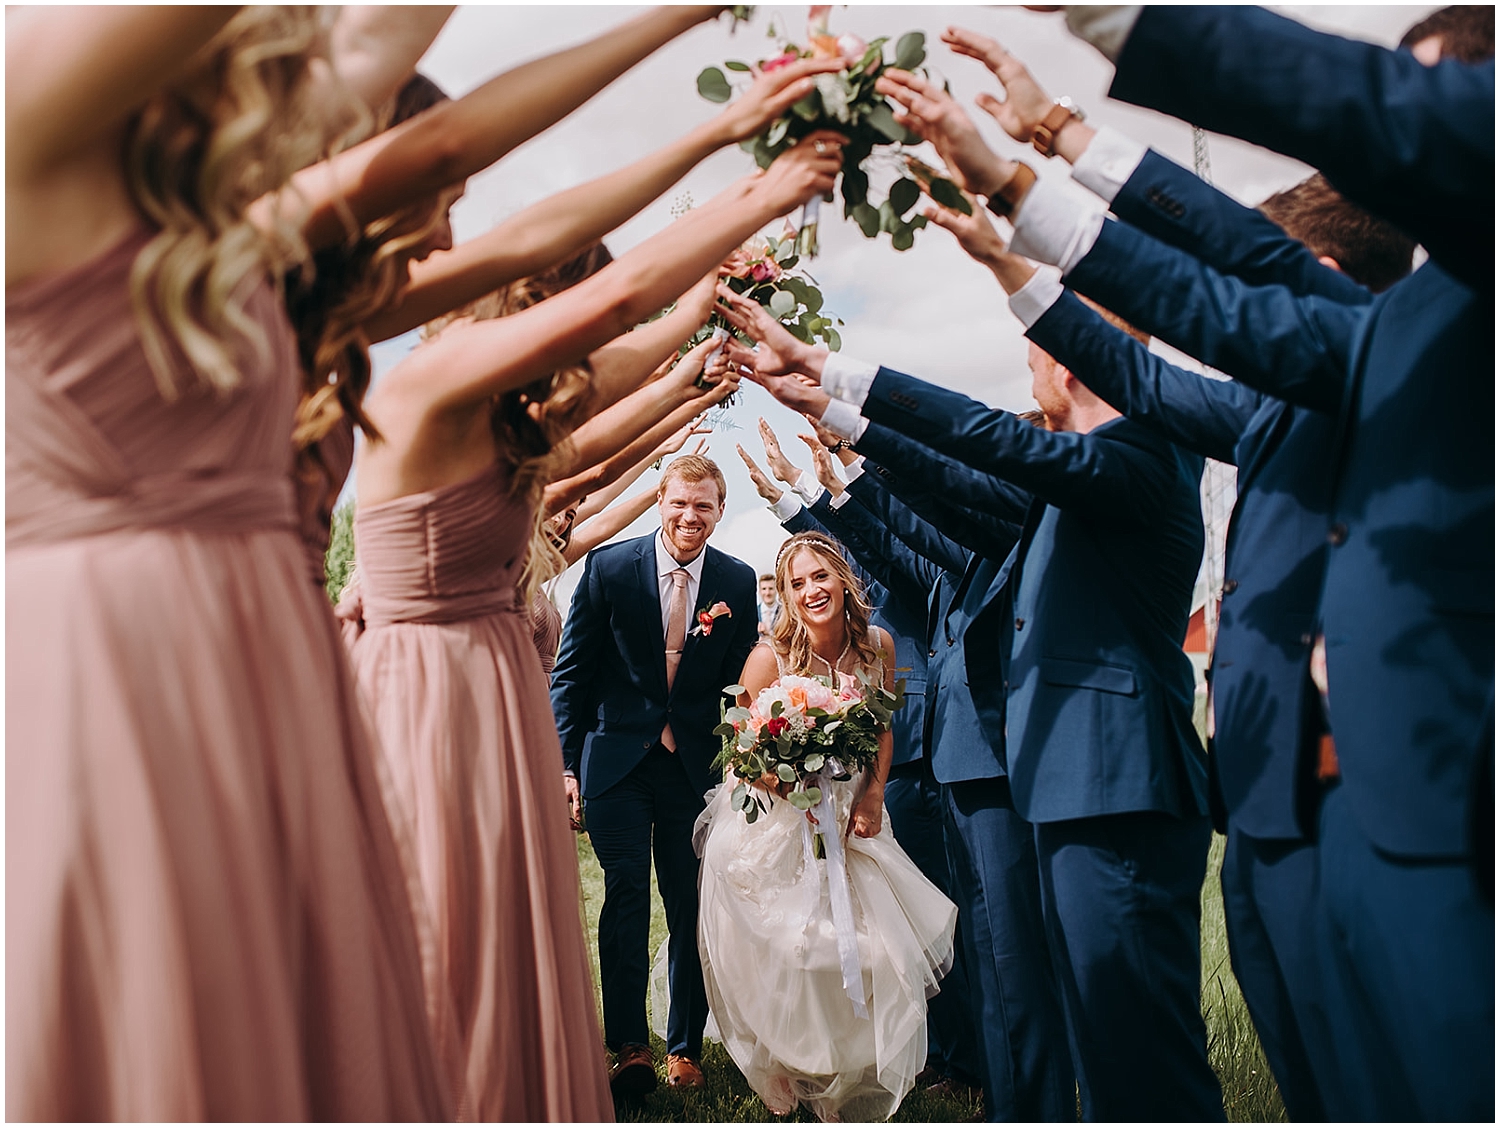 dusty rose bridesmaid dresses and navy groomsuit for dusty rose and navy blue april wedding 2020